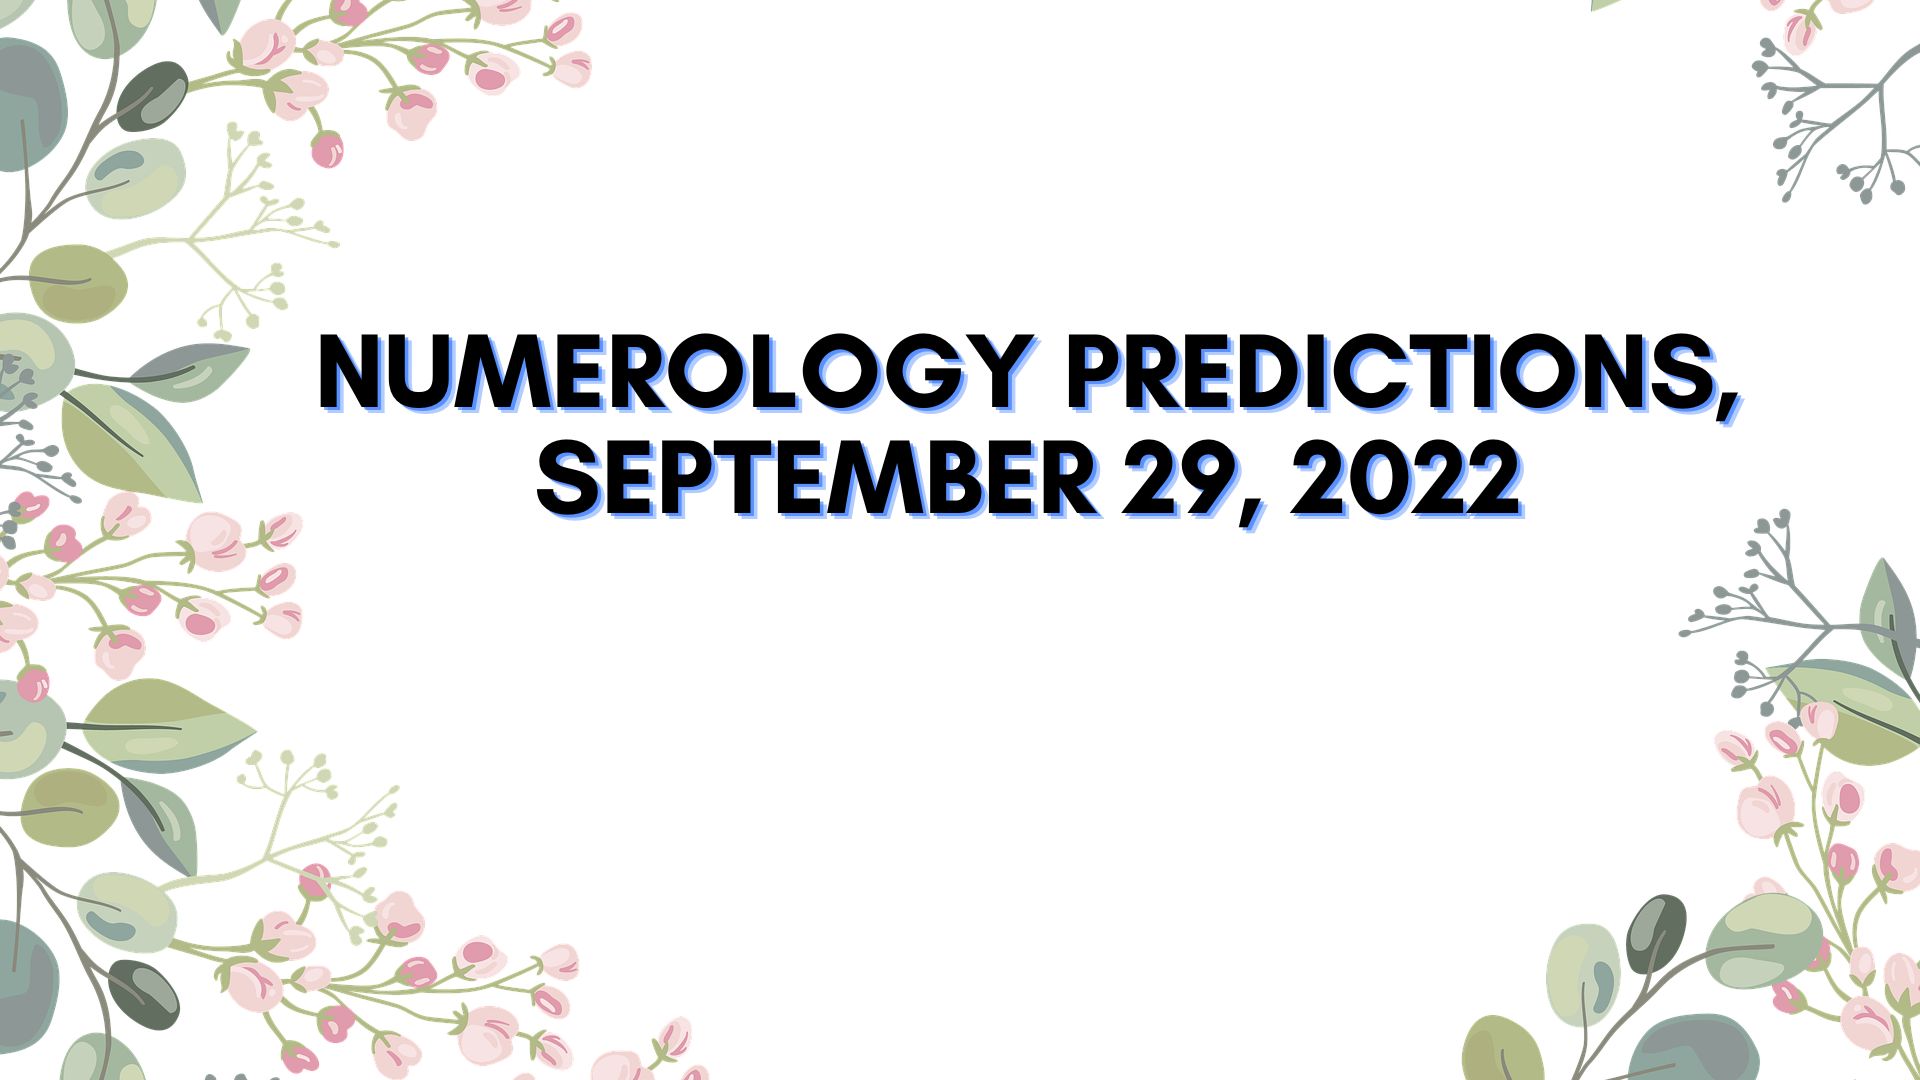 Numerology Predictions, September 29, 2022 - Check Out Your Lucky Numbers And Other Details